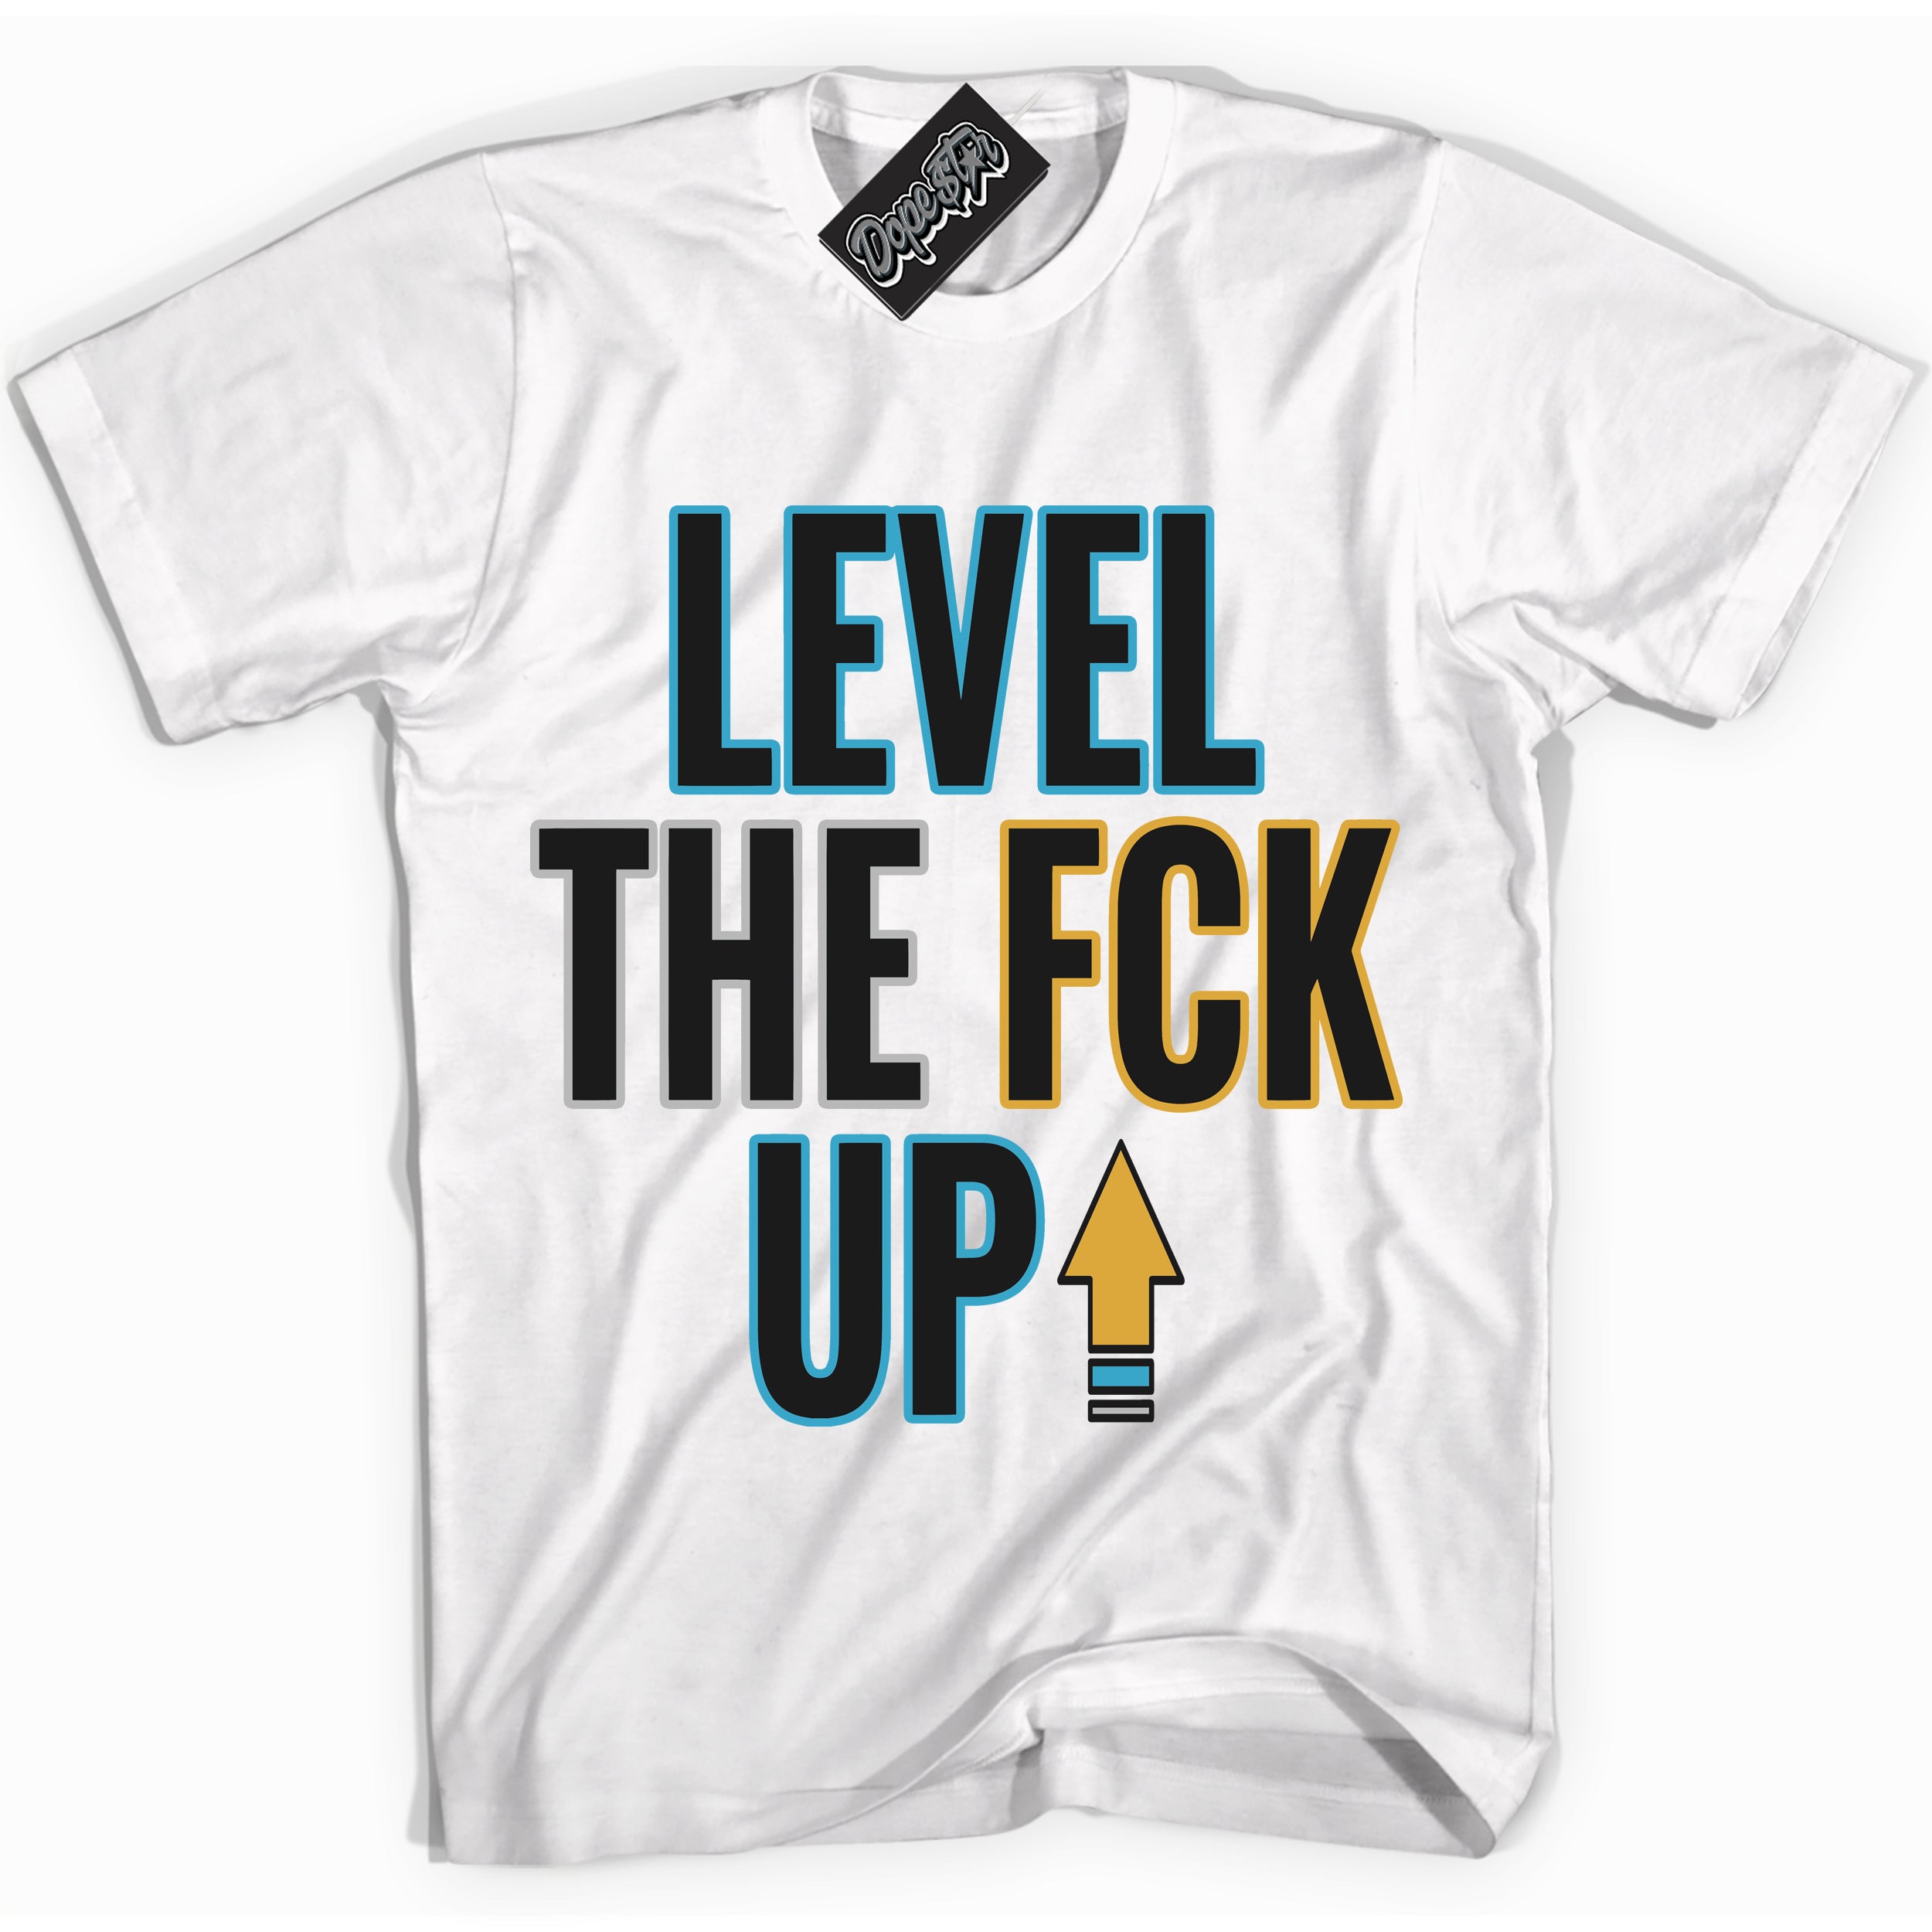 Cool White Shirt with “ Level The Fck Up” design that perfectly matches Aqua 5s Sneakers.